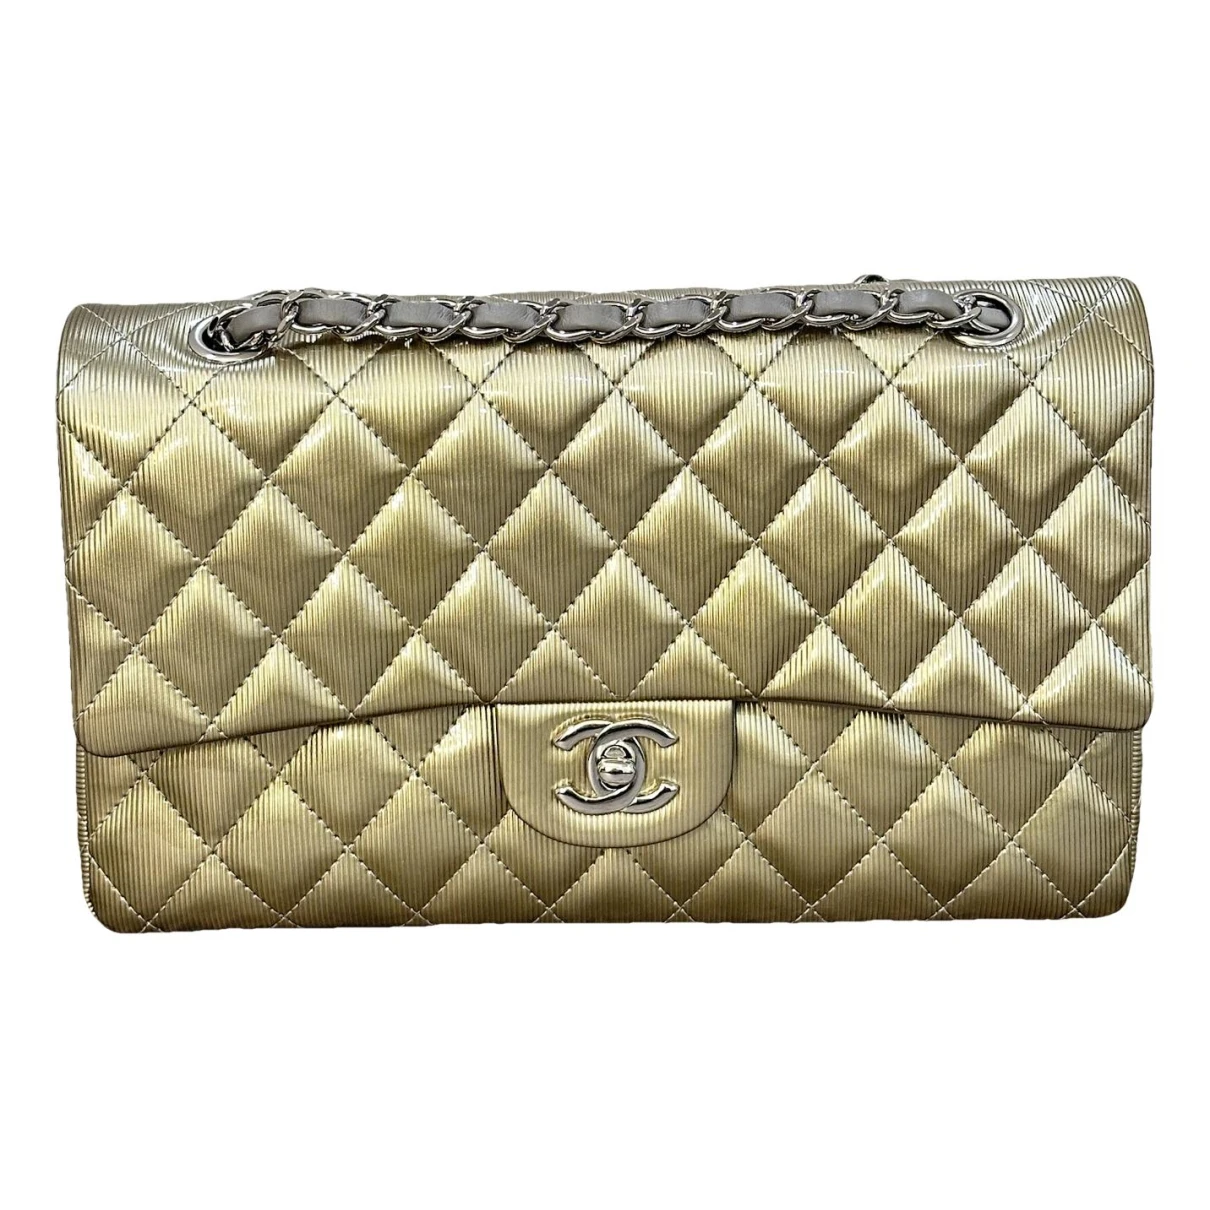 Pre-owned Chanel Timeless/classique Patent Leather Crossbody Bag In Gold